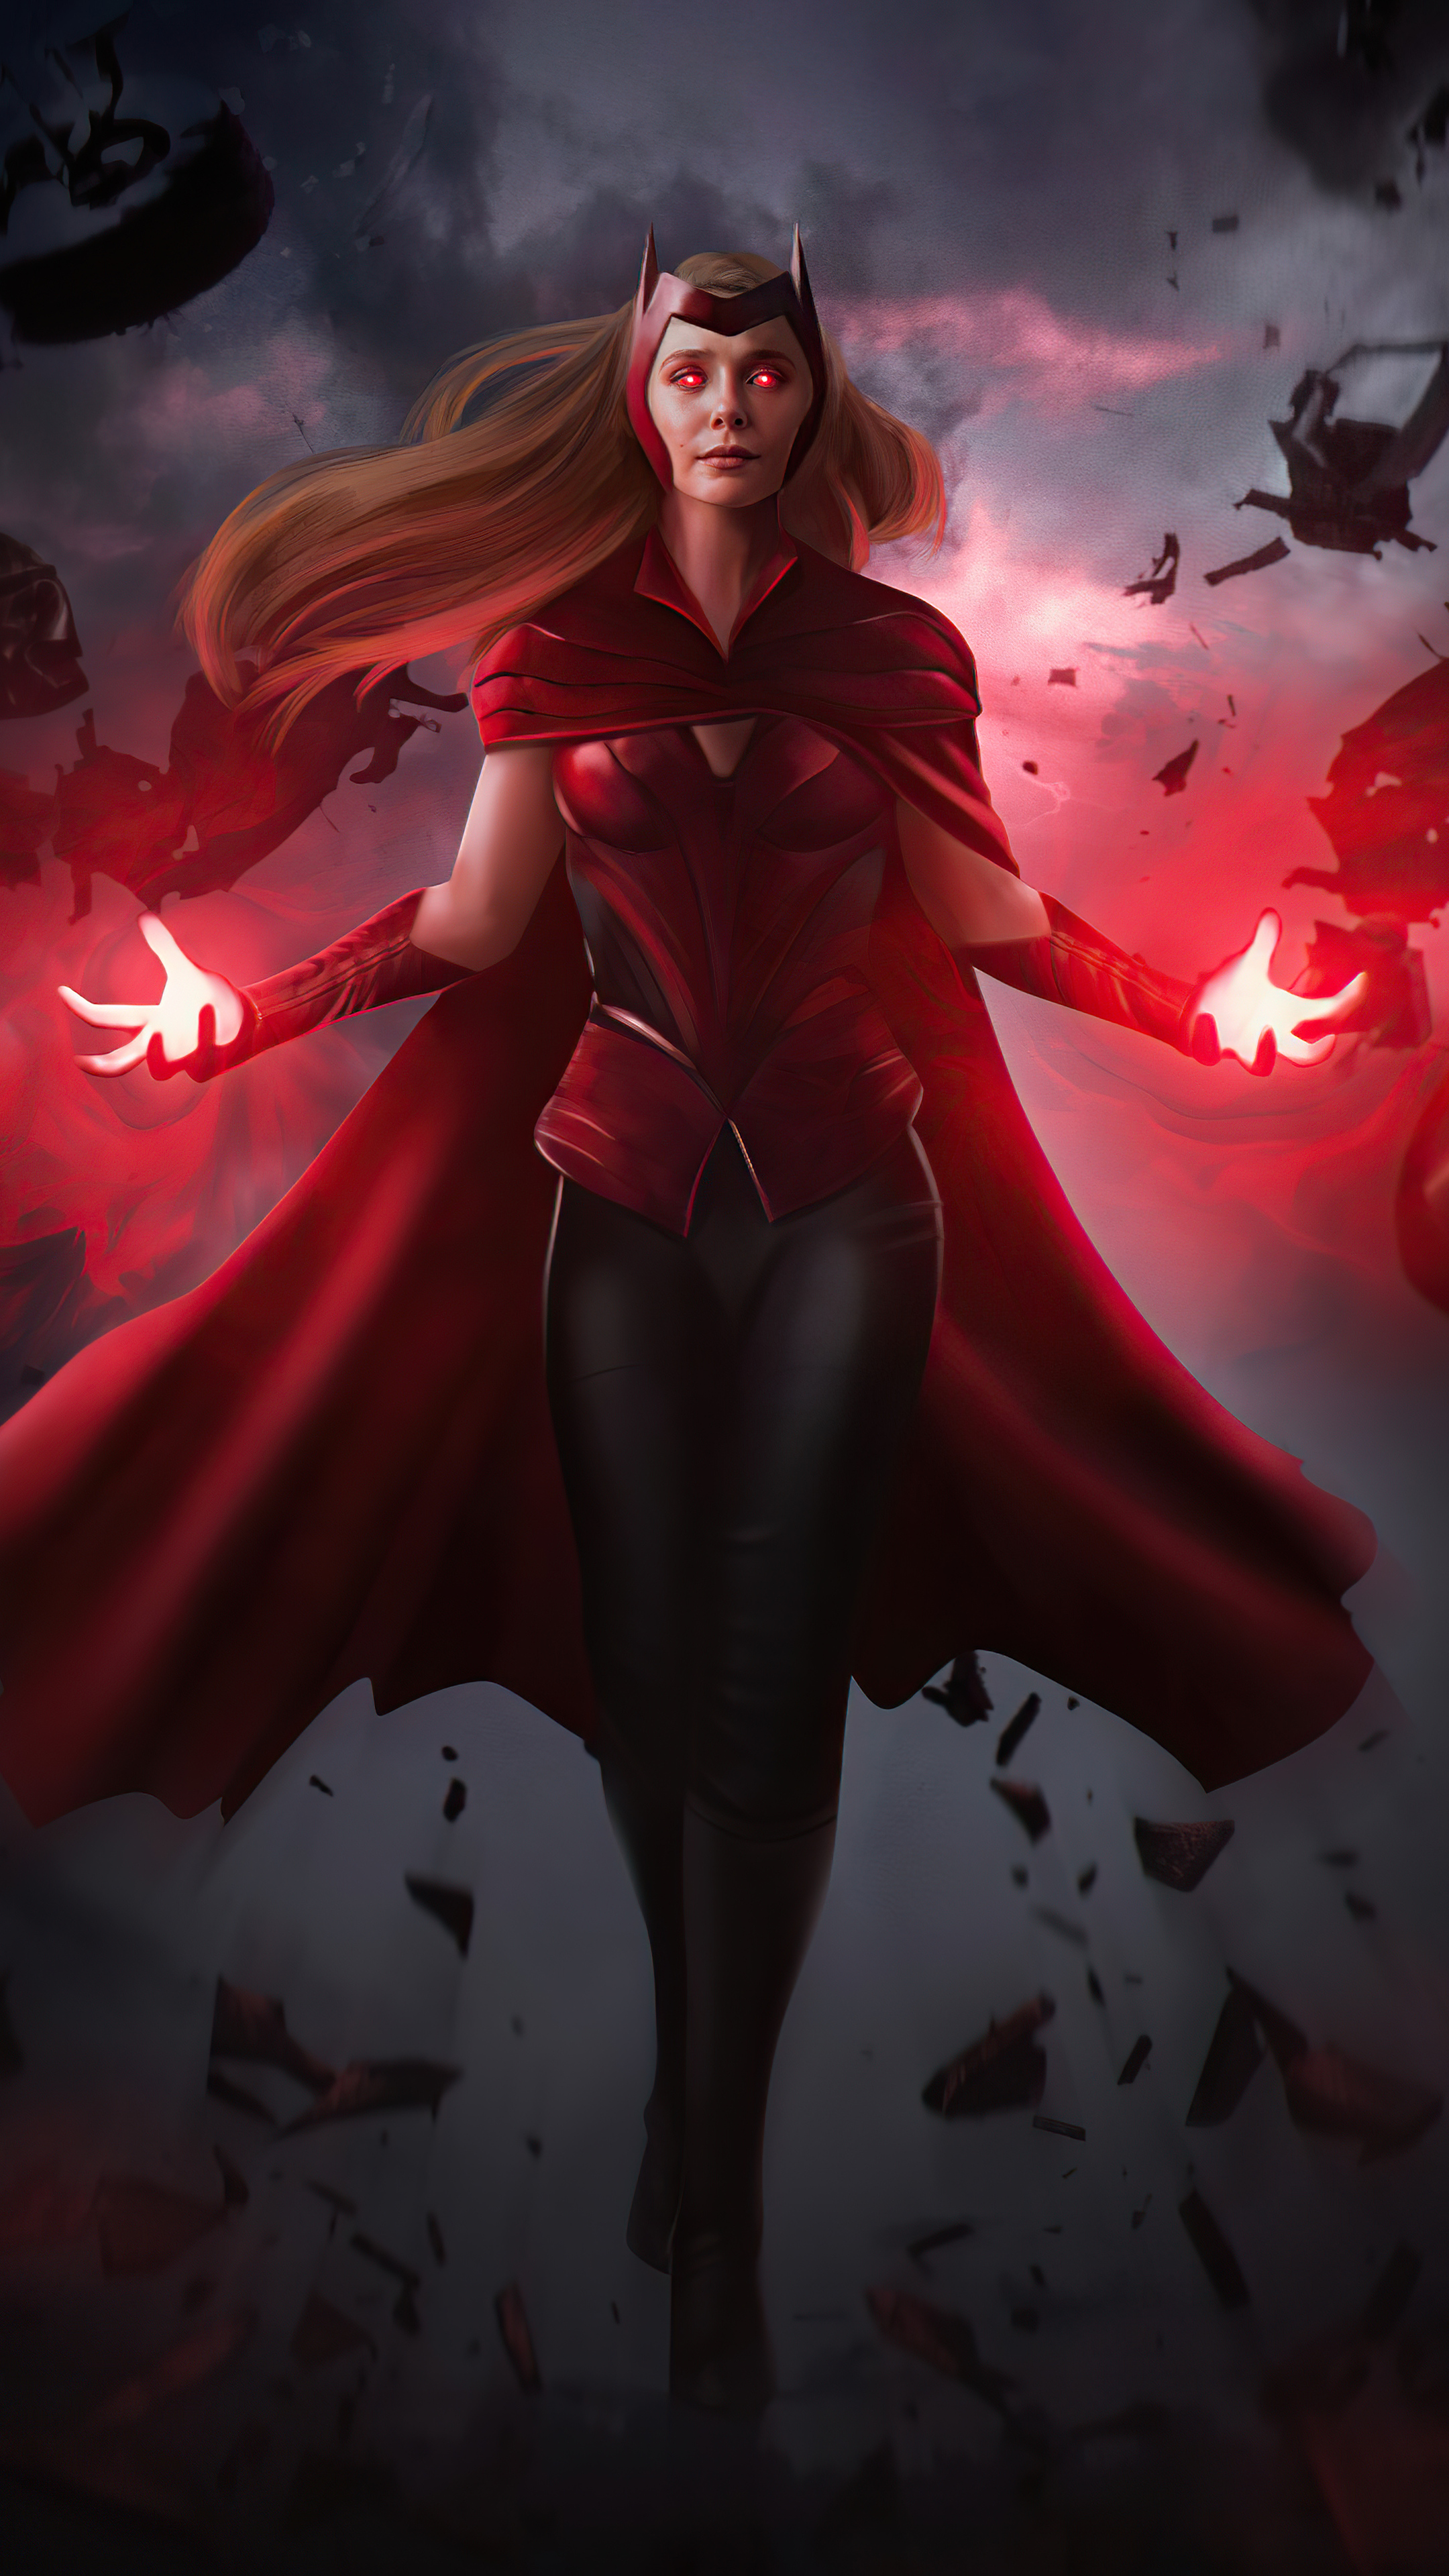 The Scarlet Witch Wanda Vision 4k Sony Xperia X, XZ, Z5 Premium HD 4k Wallpaper, Image, Background, Photo and Picture